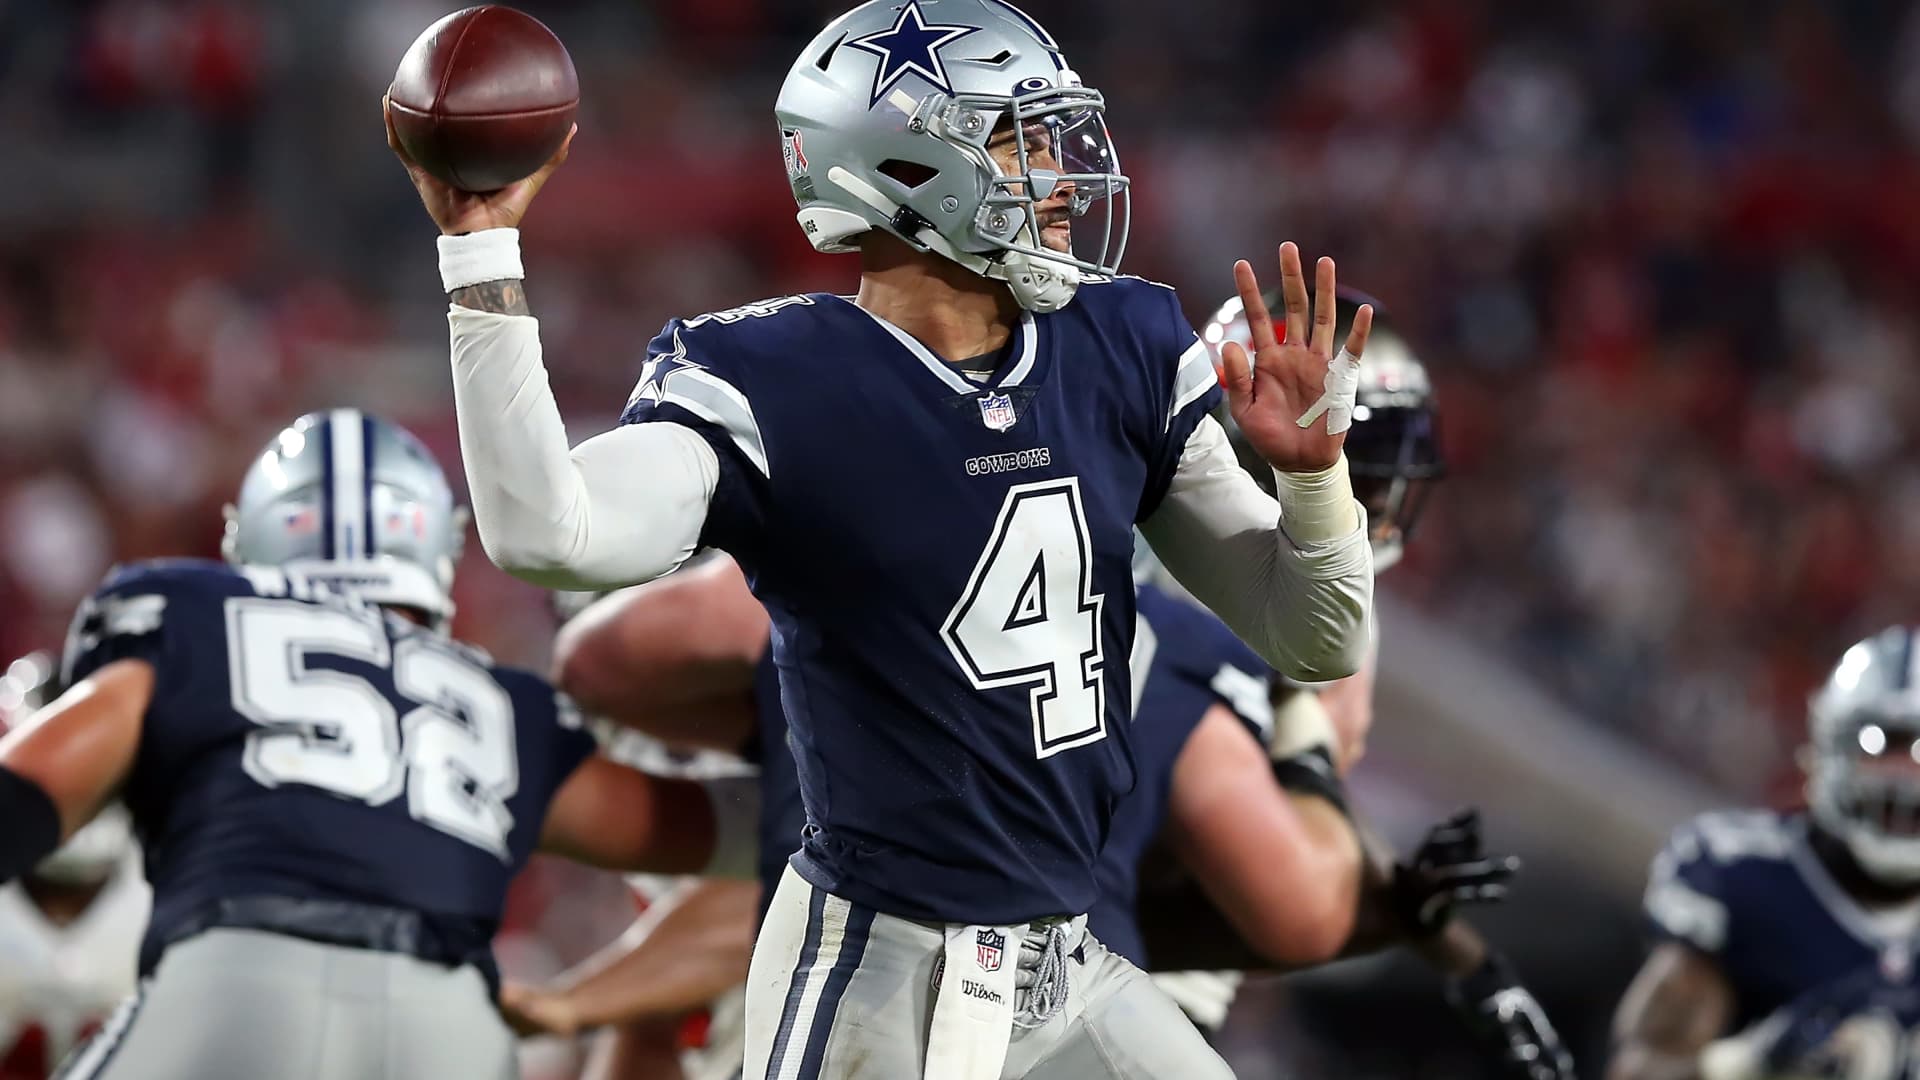 Dallas Cowboys Quarterback Dak Prescott (4) throws a pass during the regular season game between the Dallas Cowboys and the Tampa Bay Buccaneers on September 09, 2021 at Raymond James Stadium in Tampa, Florida.